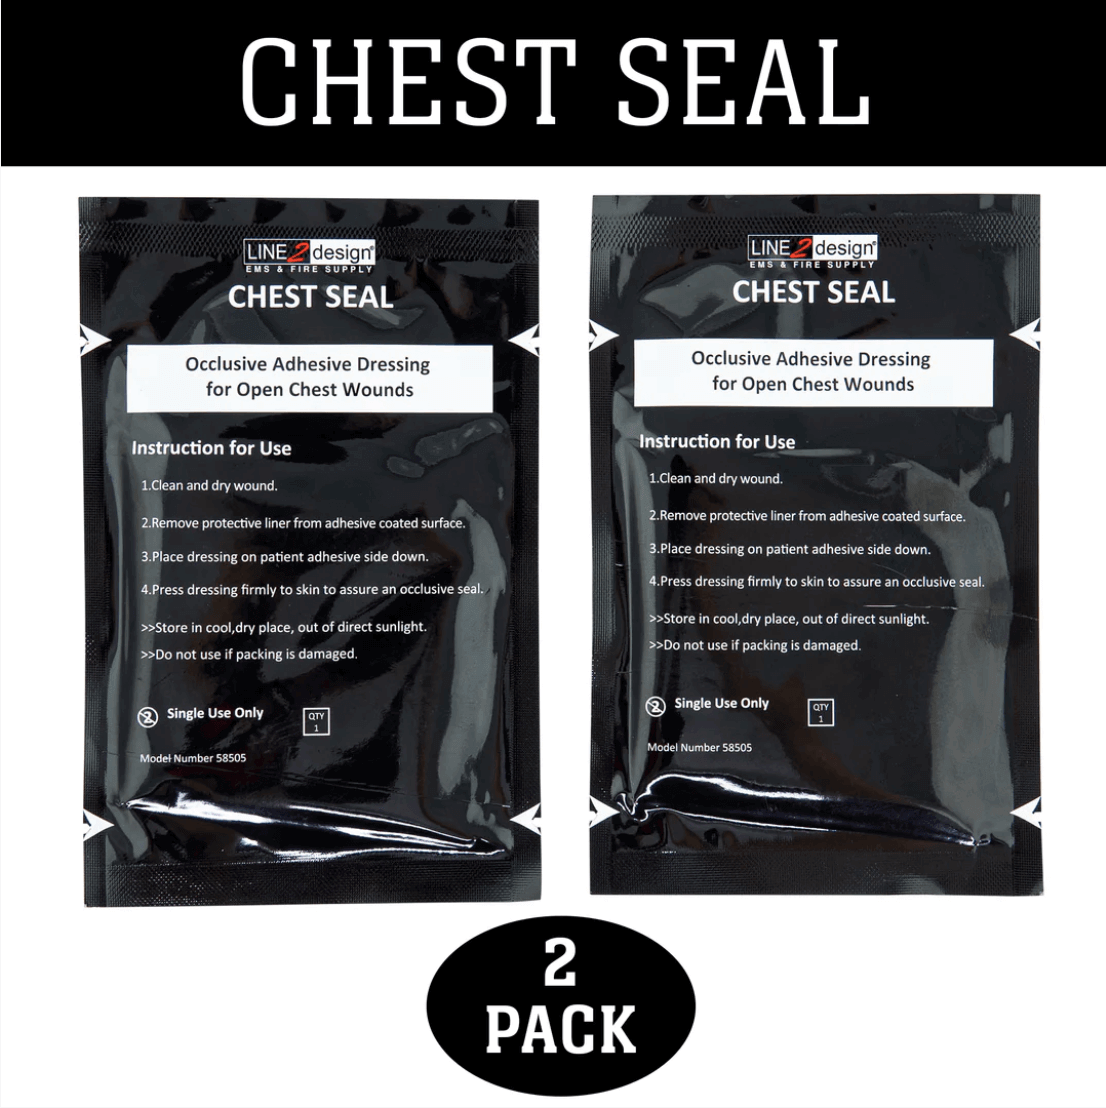 LINE2design Chest Seal, Occlusive Dressing, Open Chest Wound, Trauma First Aid, 2 Pack